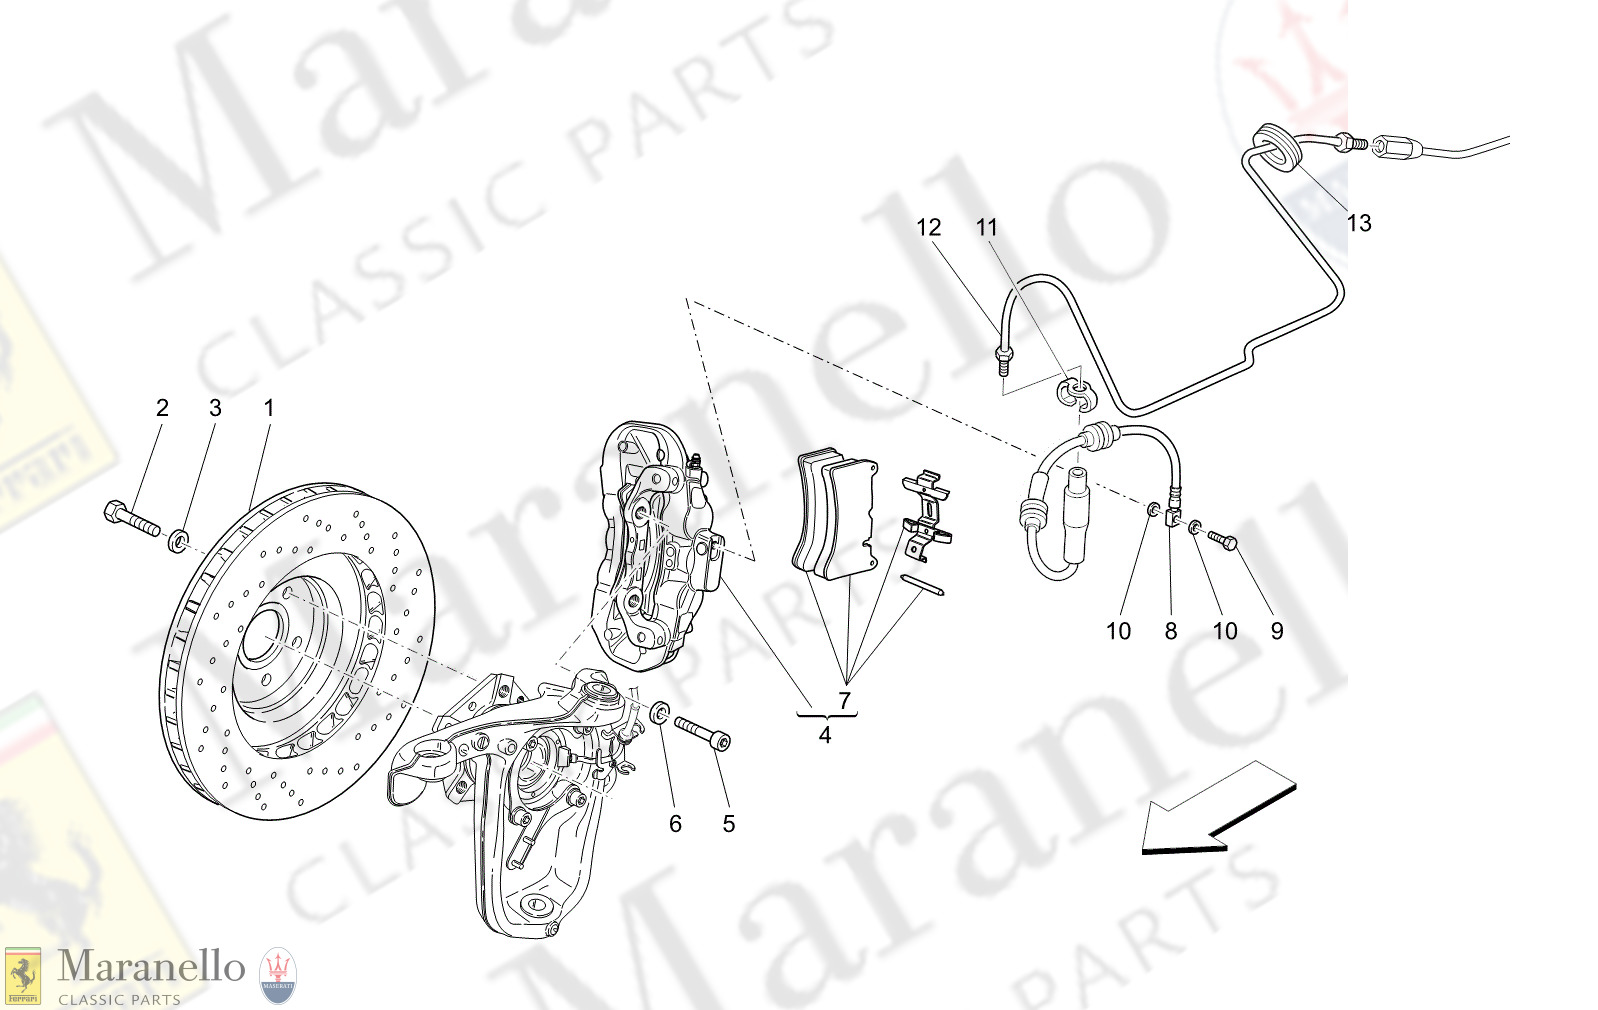 04.10 - 13 - 0410 - 13 Braking Devices On Front Wheels